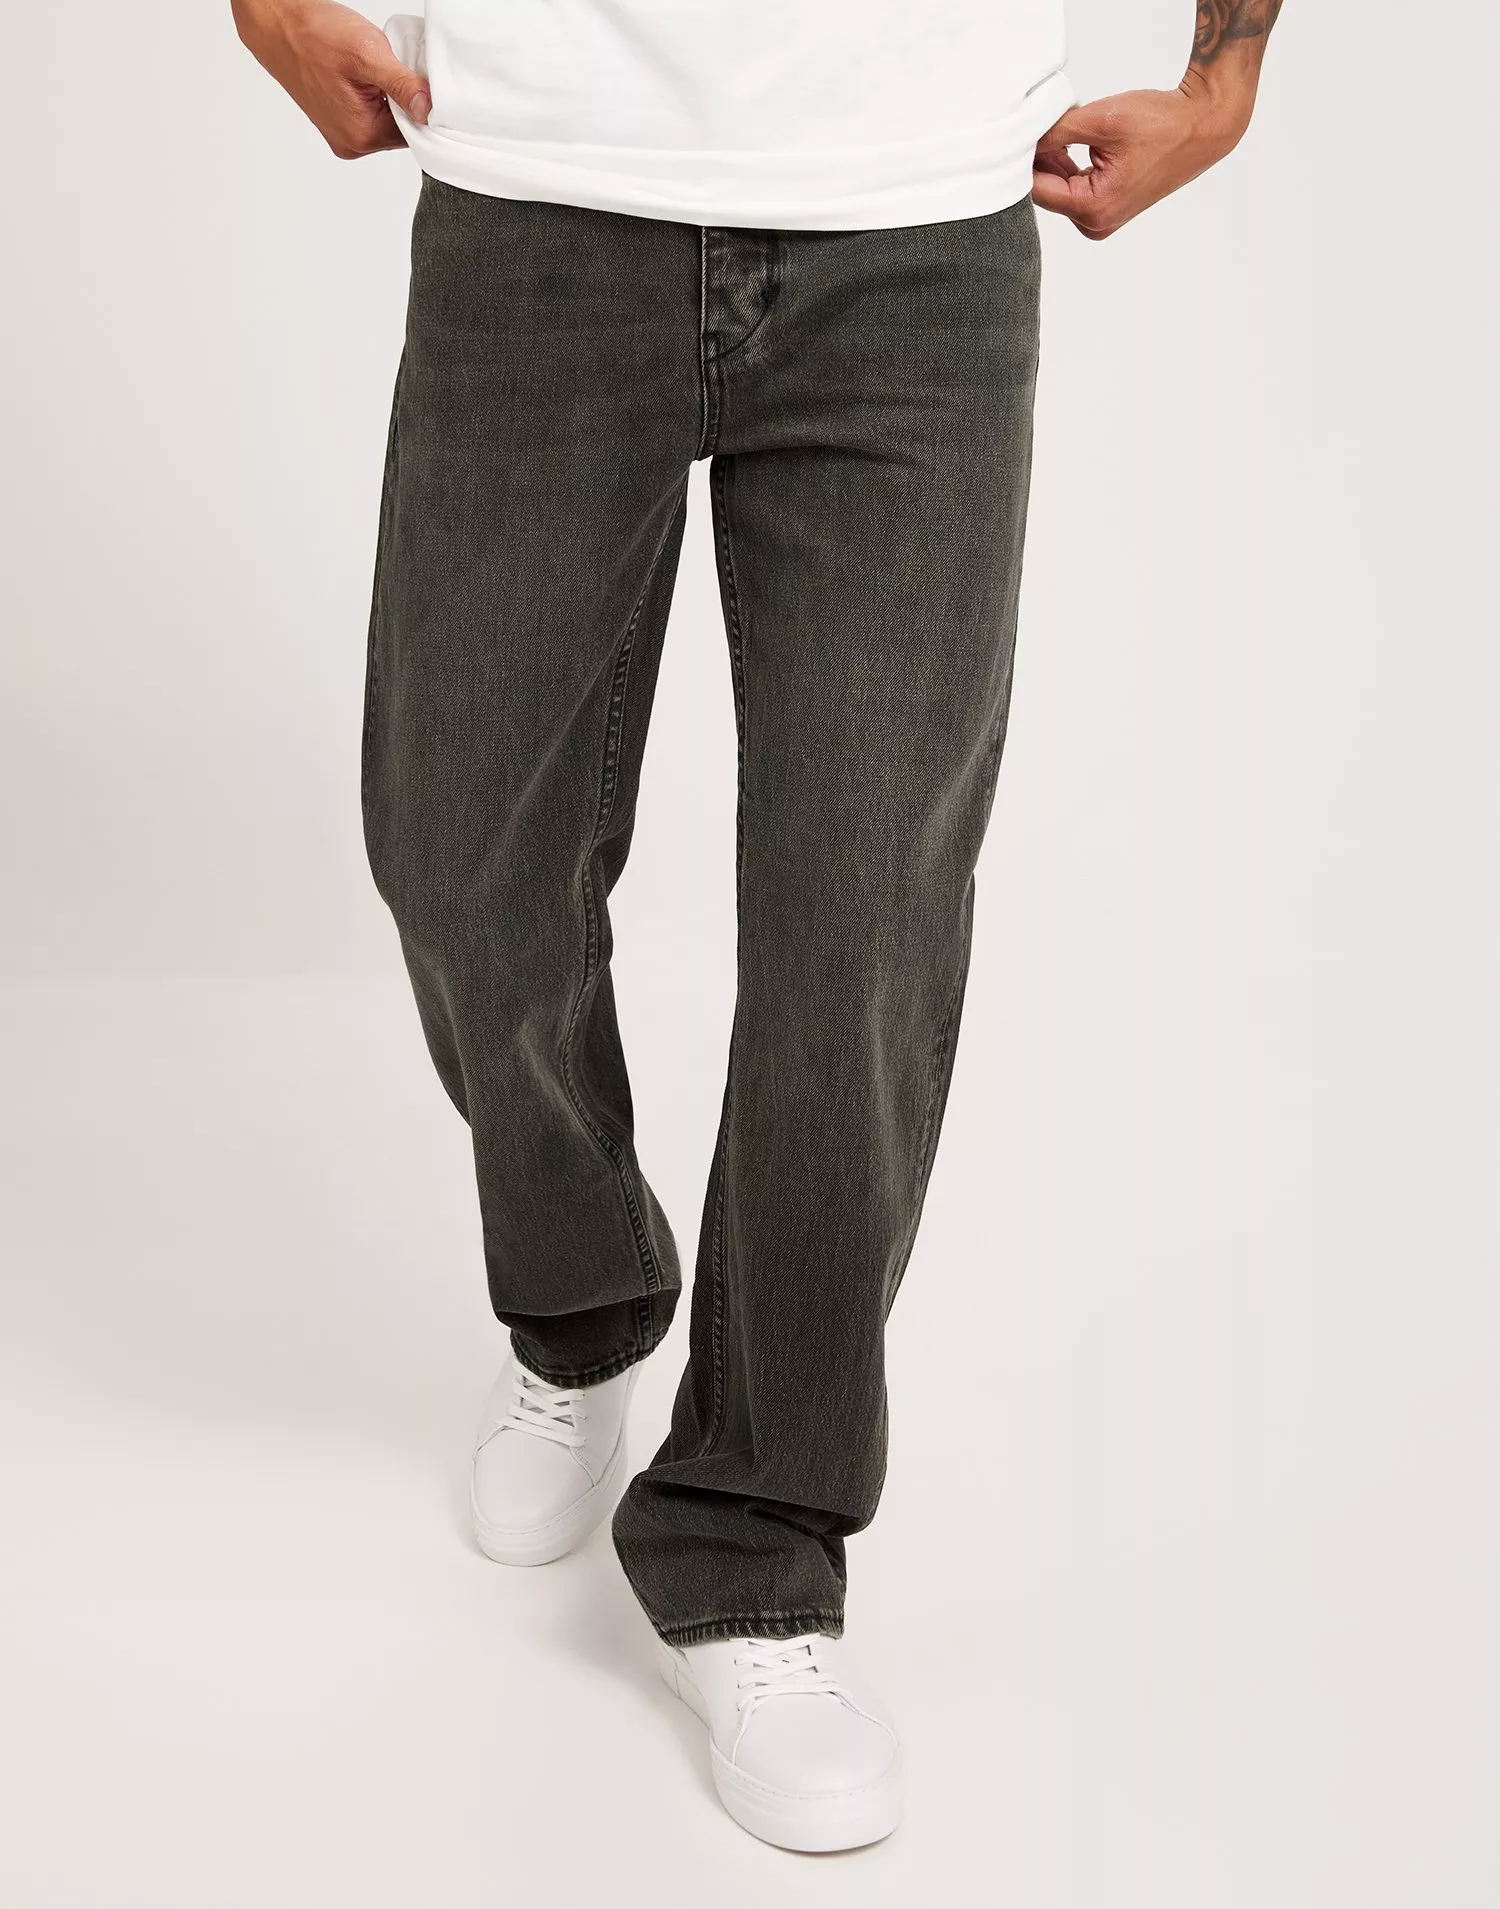 Neuw Julian Relaxed Oxide Loose fit jeans Black product